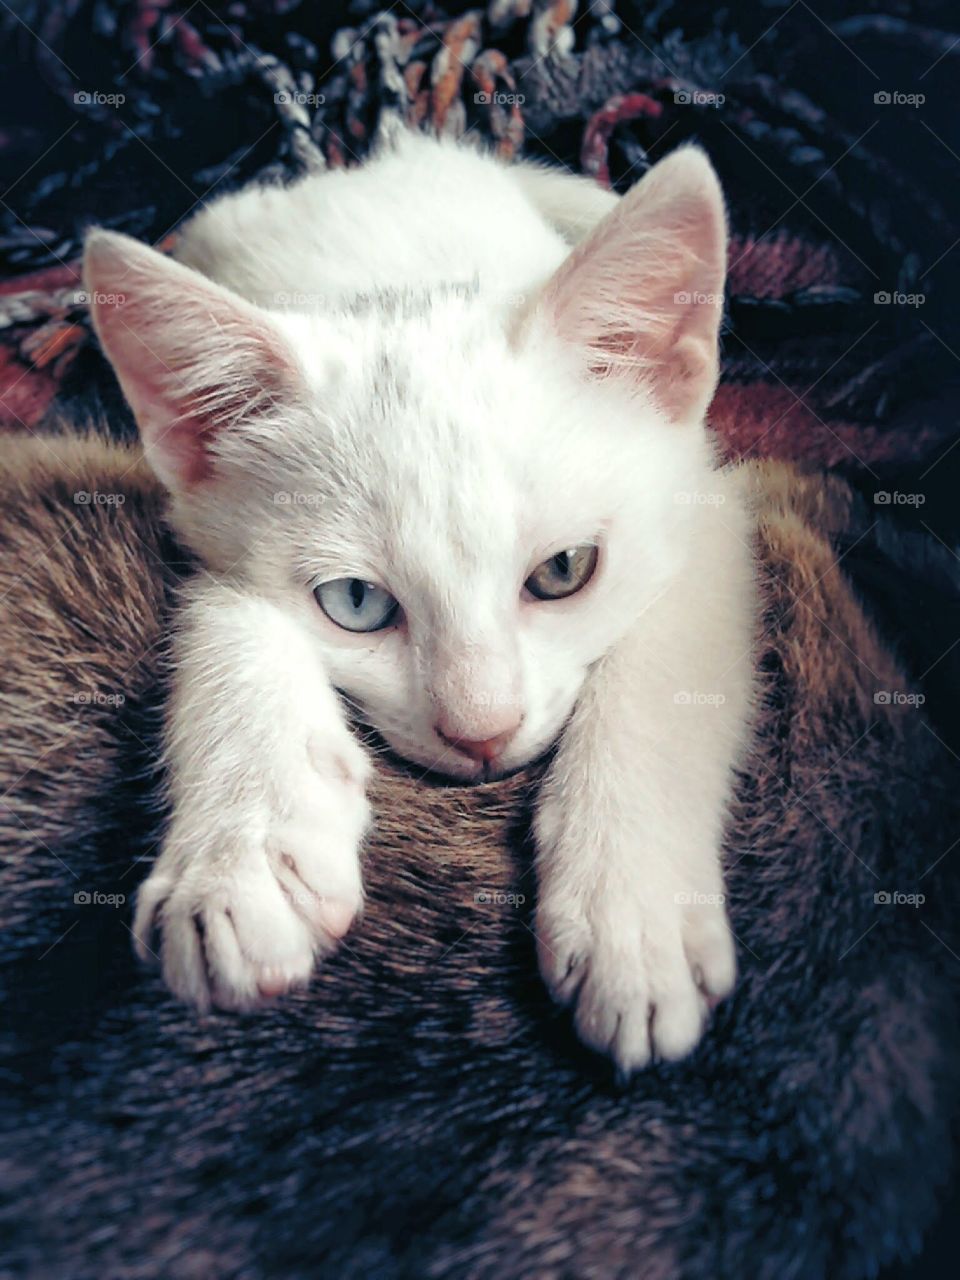 White cat with two colored eyes